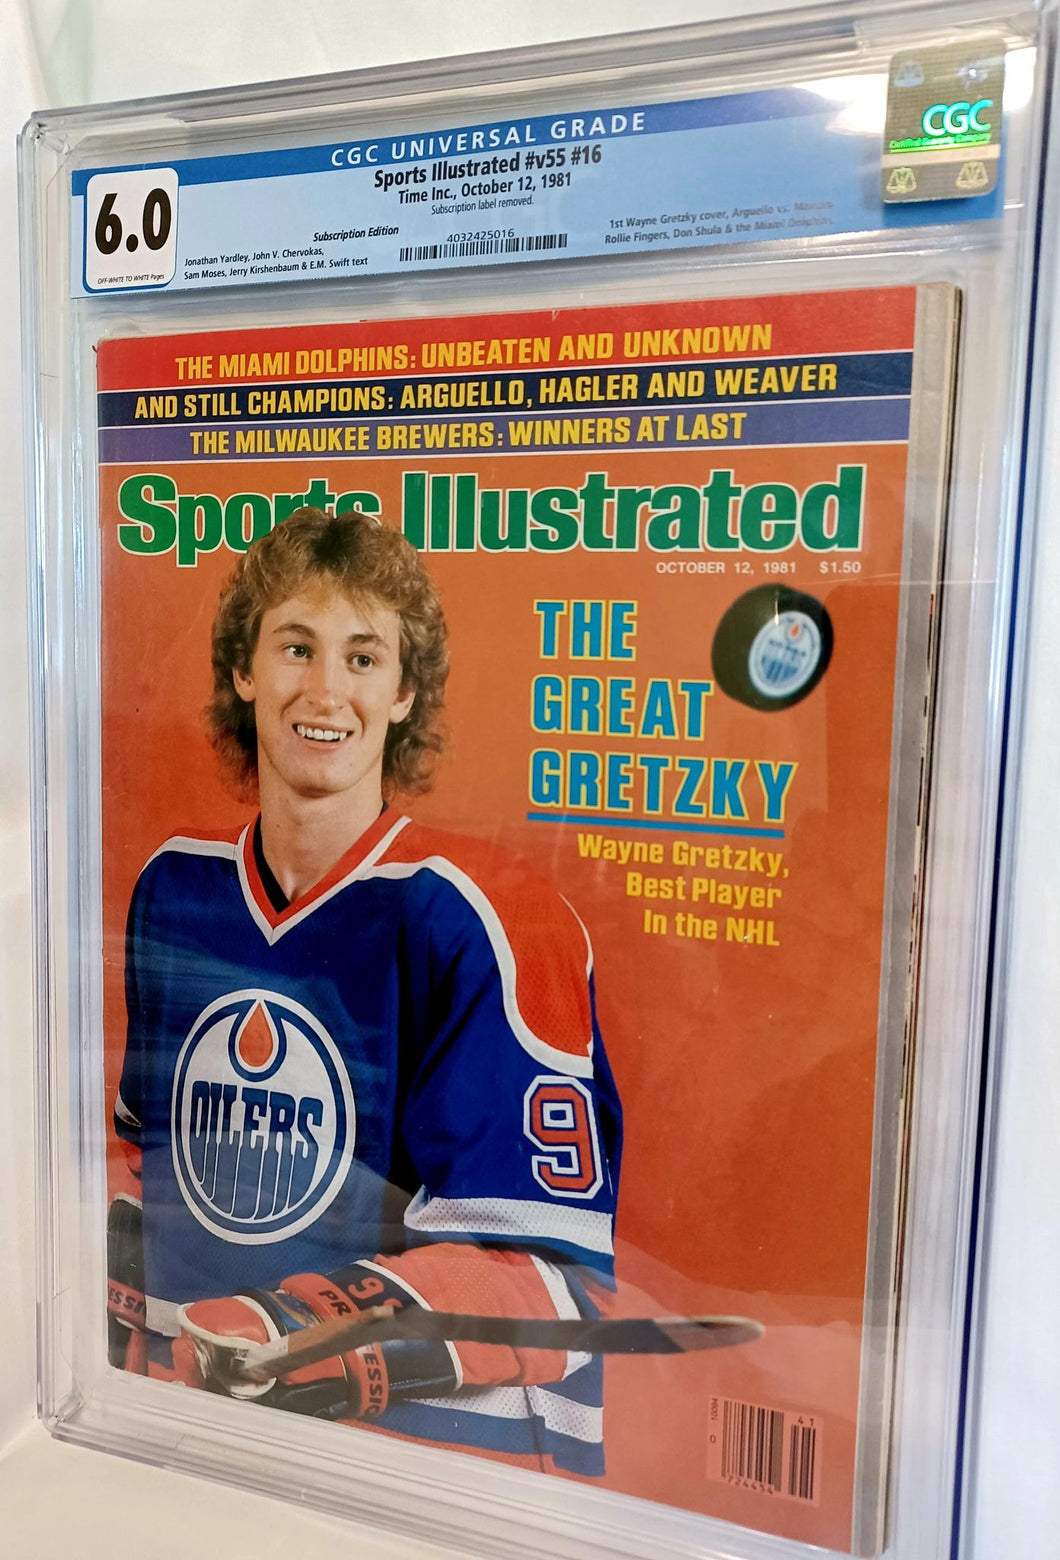 Sports Illustrated Oct 12, 1981 Magazine CGC 6.0 - Wayne Gretzky First Cover RC